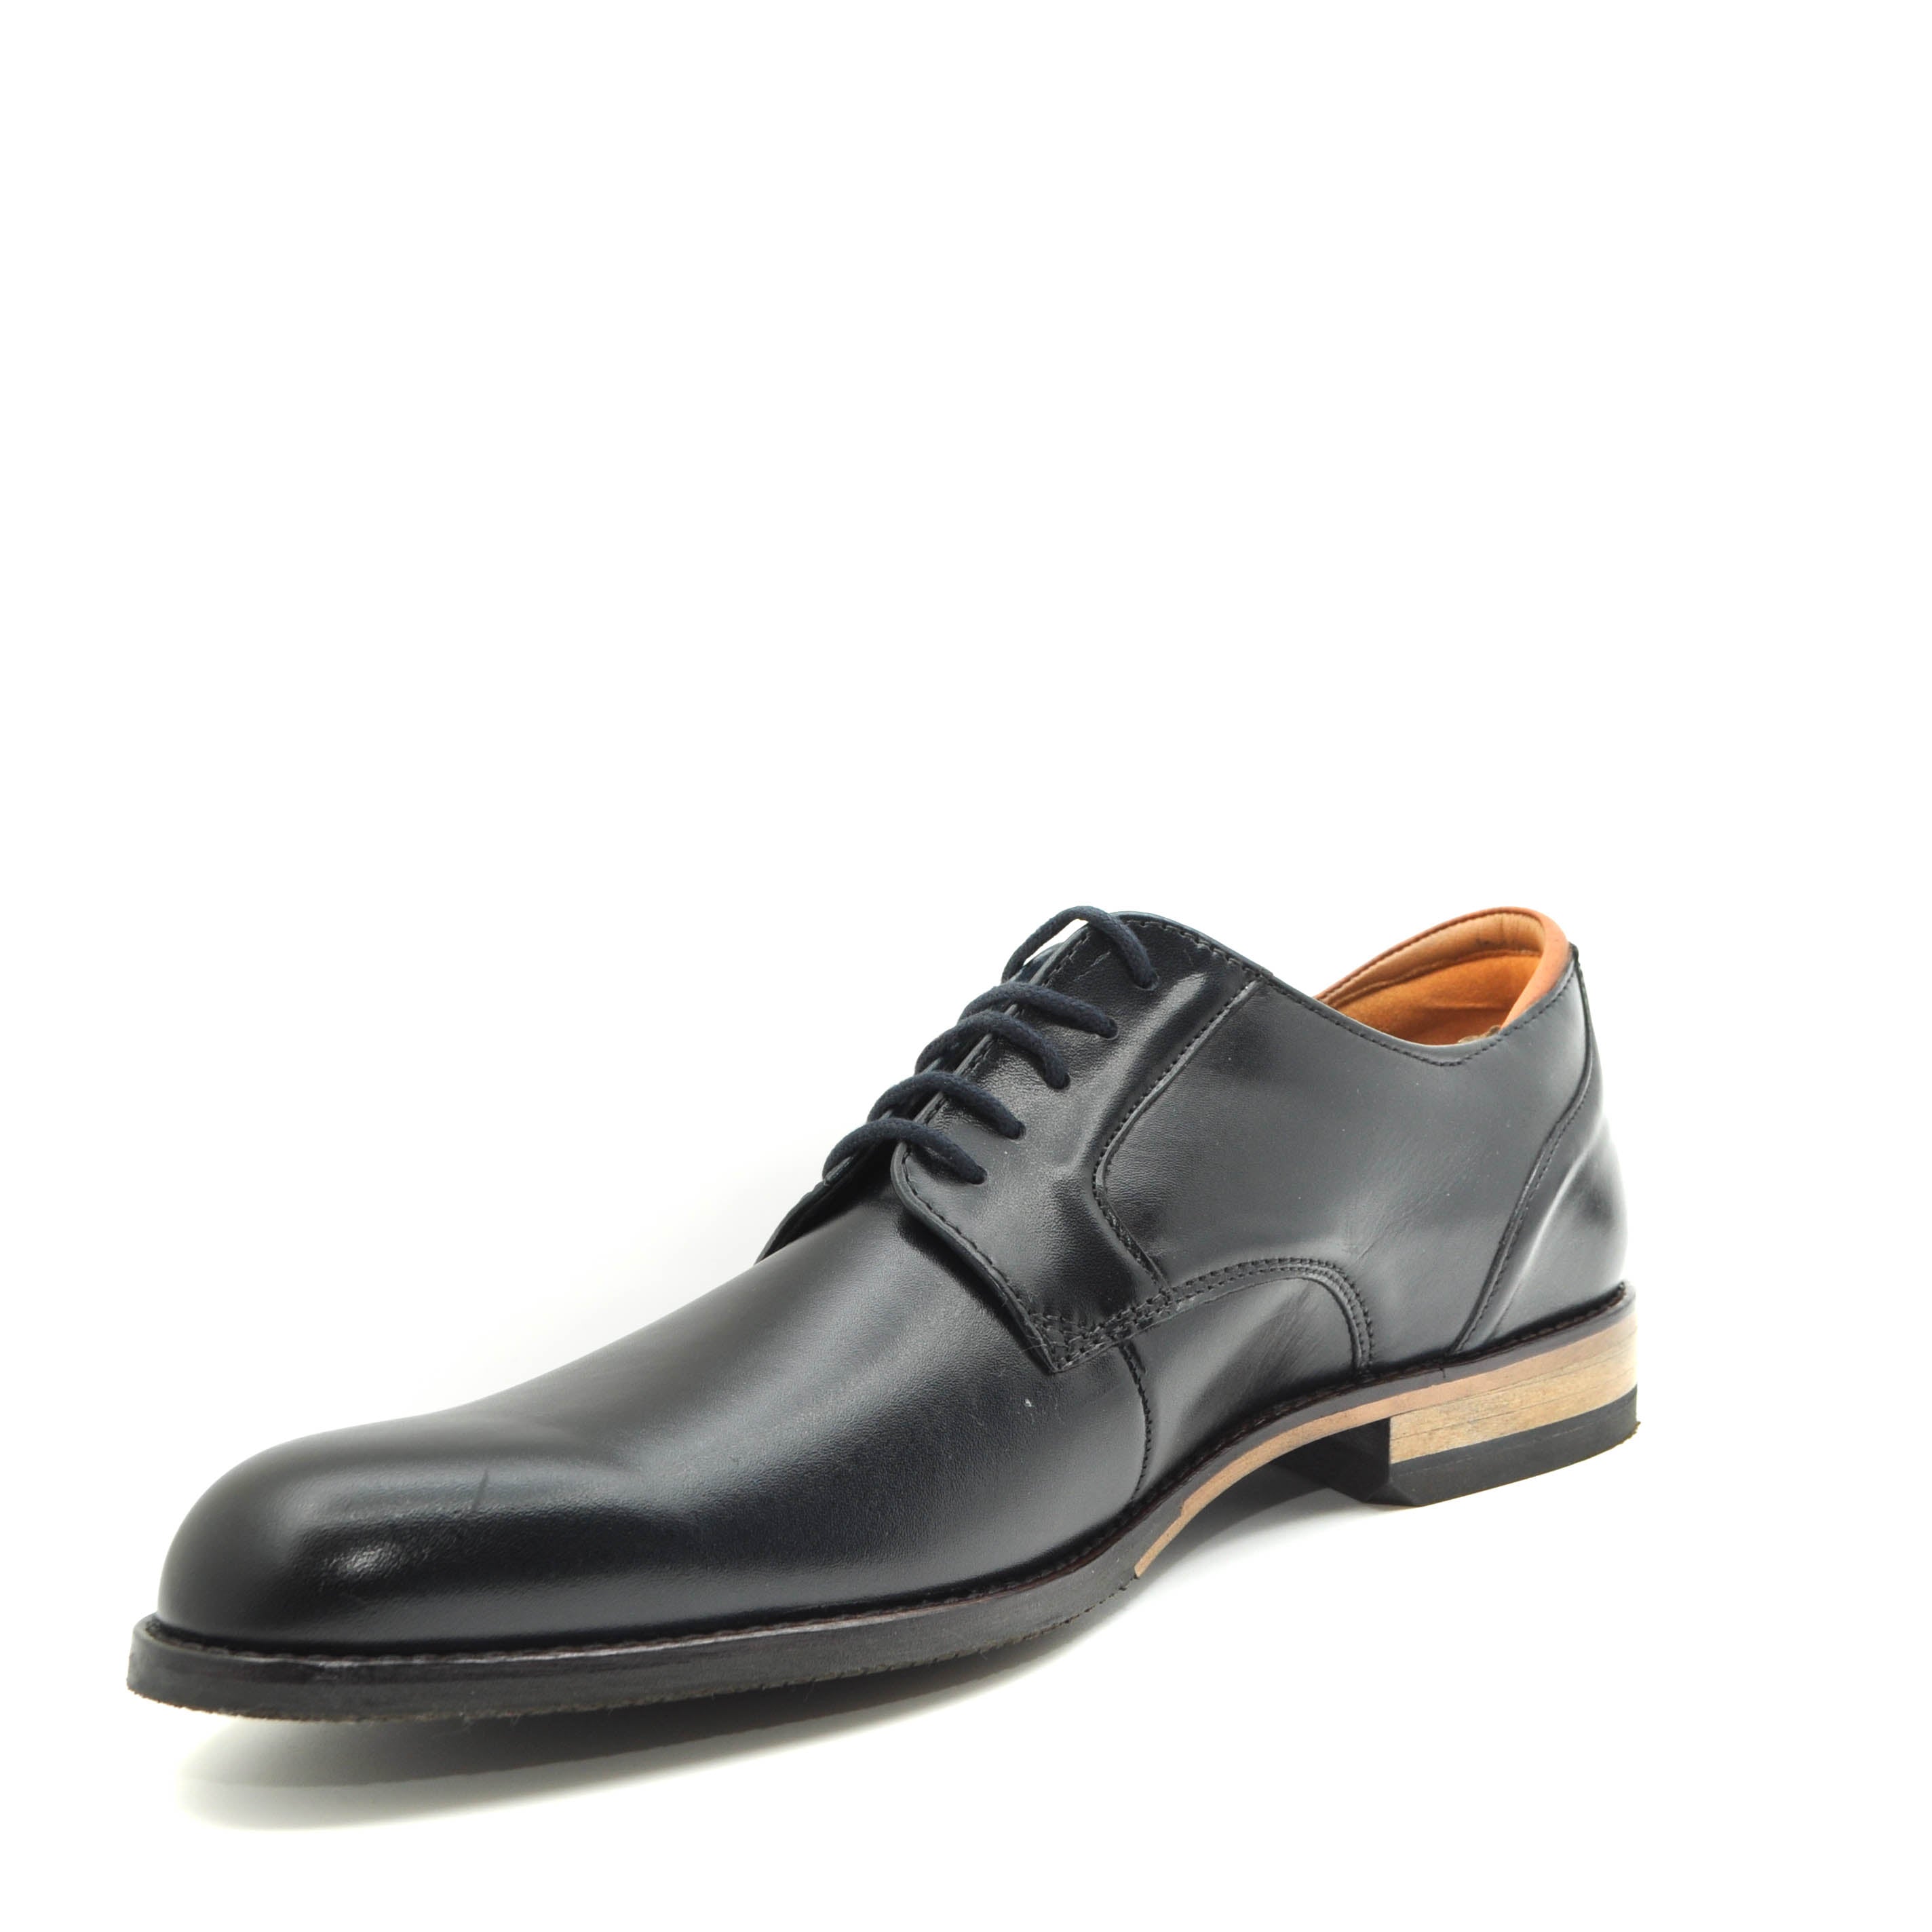 online ireland | navy leather dress shoes | suit shoes